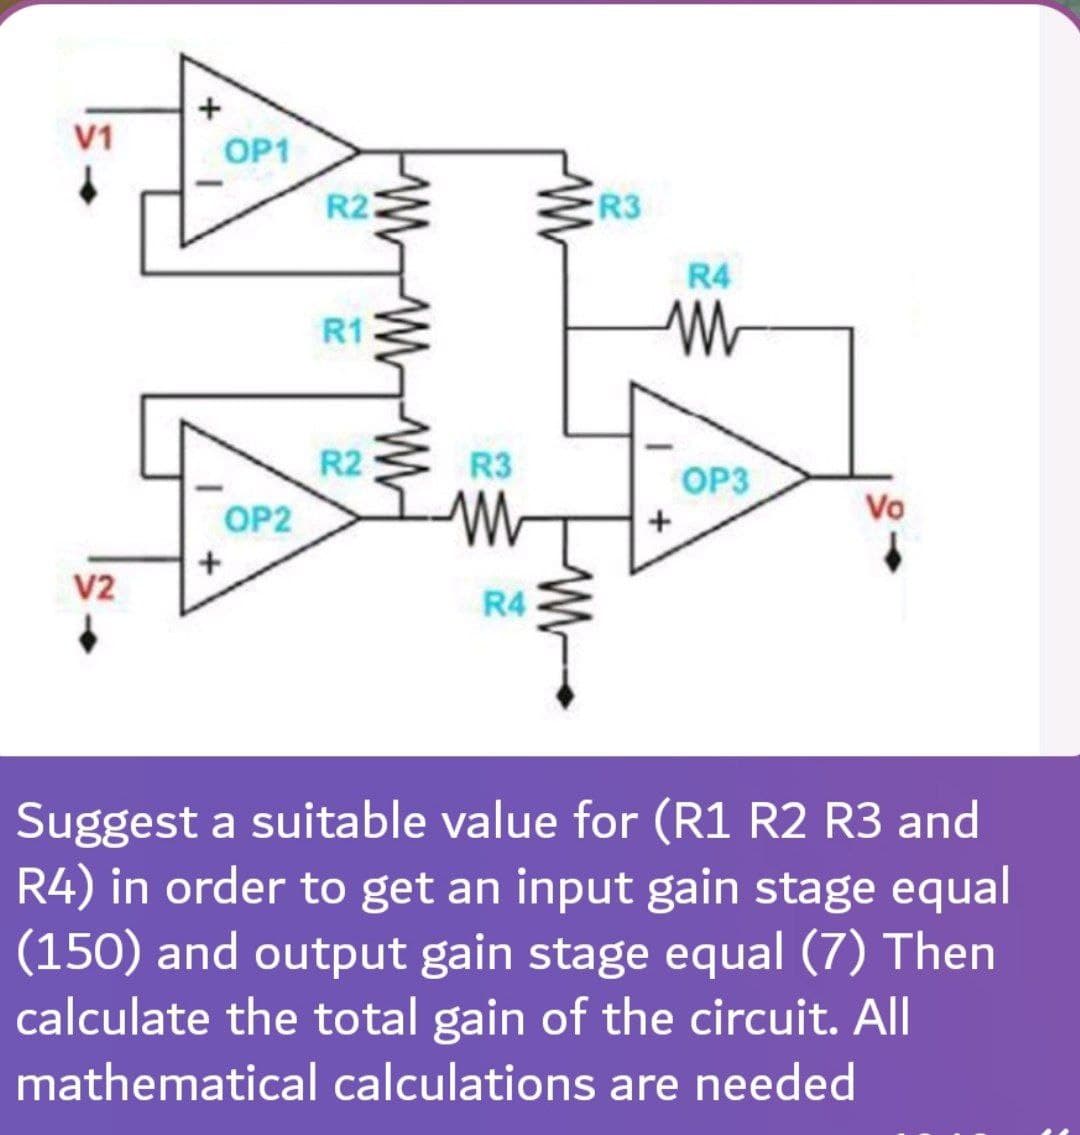 V1
OP1
+
OP2
R22
W
MMM
R1
R2
R3
ww
Vo
V2
R4
Suggest a suitable value for (R1 R2 R3 and
R4) in order to get an input gain stage equal
(150) and output gain stage equal (7) Then
calculate the total gain of the circuit. All
mathematical calculations are needed
R3
W
R4
W
+
OP3